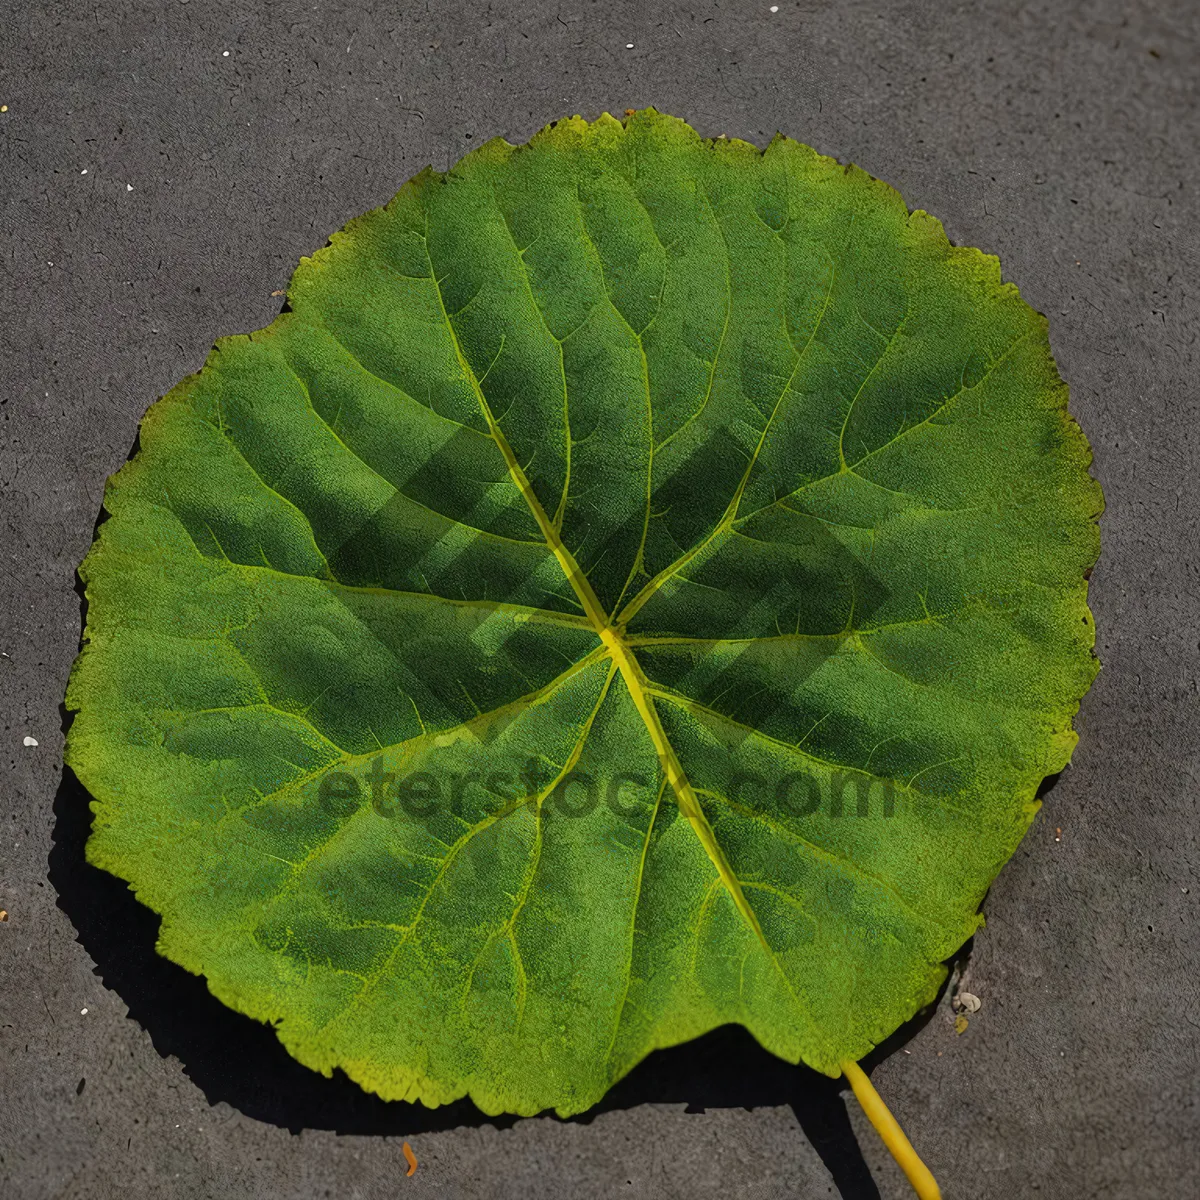 Picture of Linden Leaf: Vibrant Spring Foliage with Intricate Veins